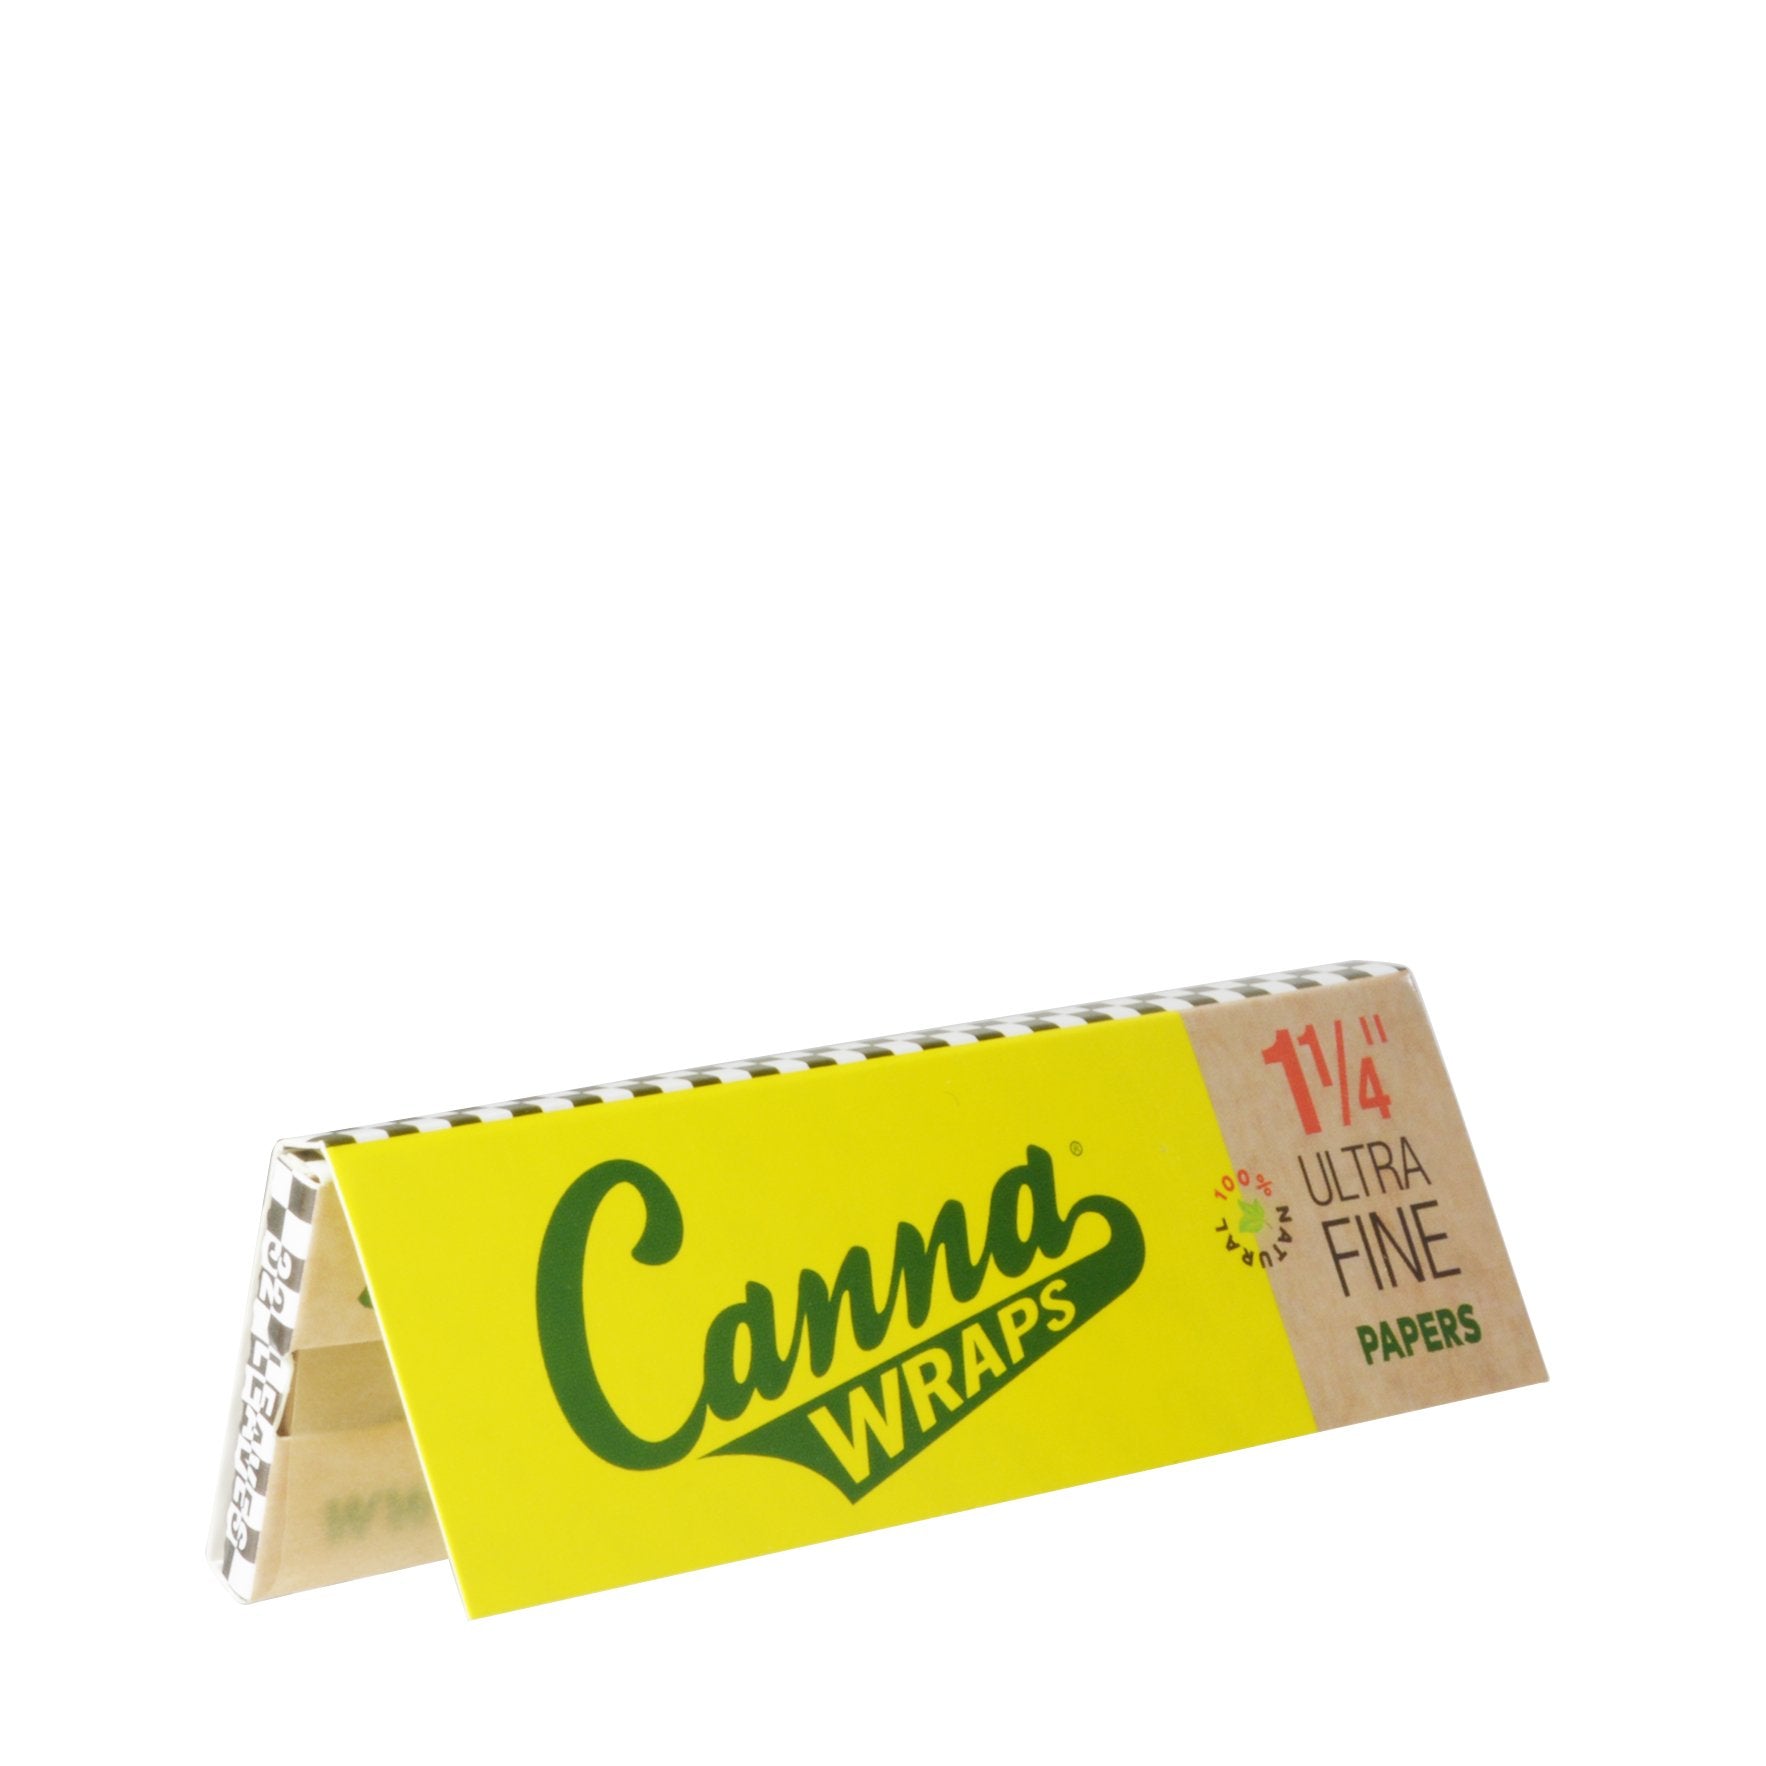 CANNA WRAPS | 'Retail Display' 1 1/4 Size Natural Rolling Papers | 83mm - Ultra Fine - 25 Count - 4